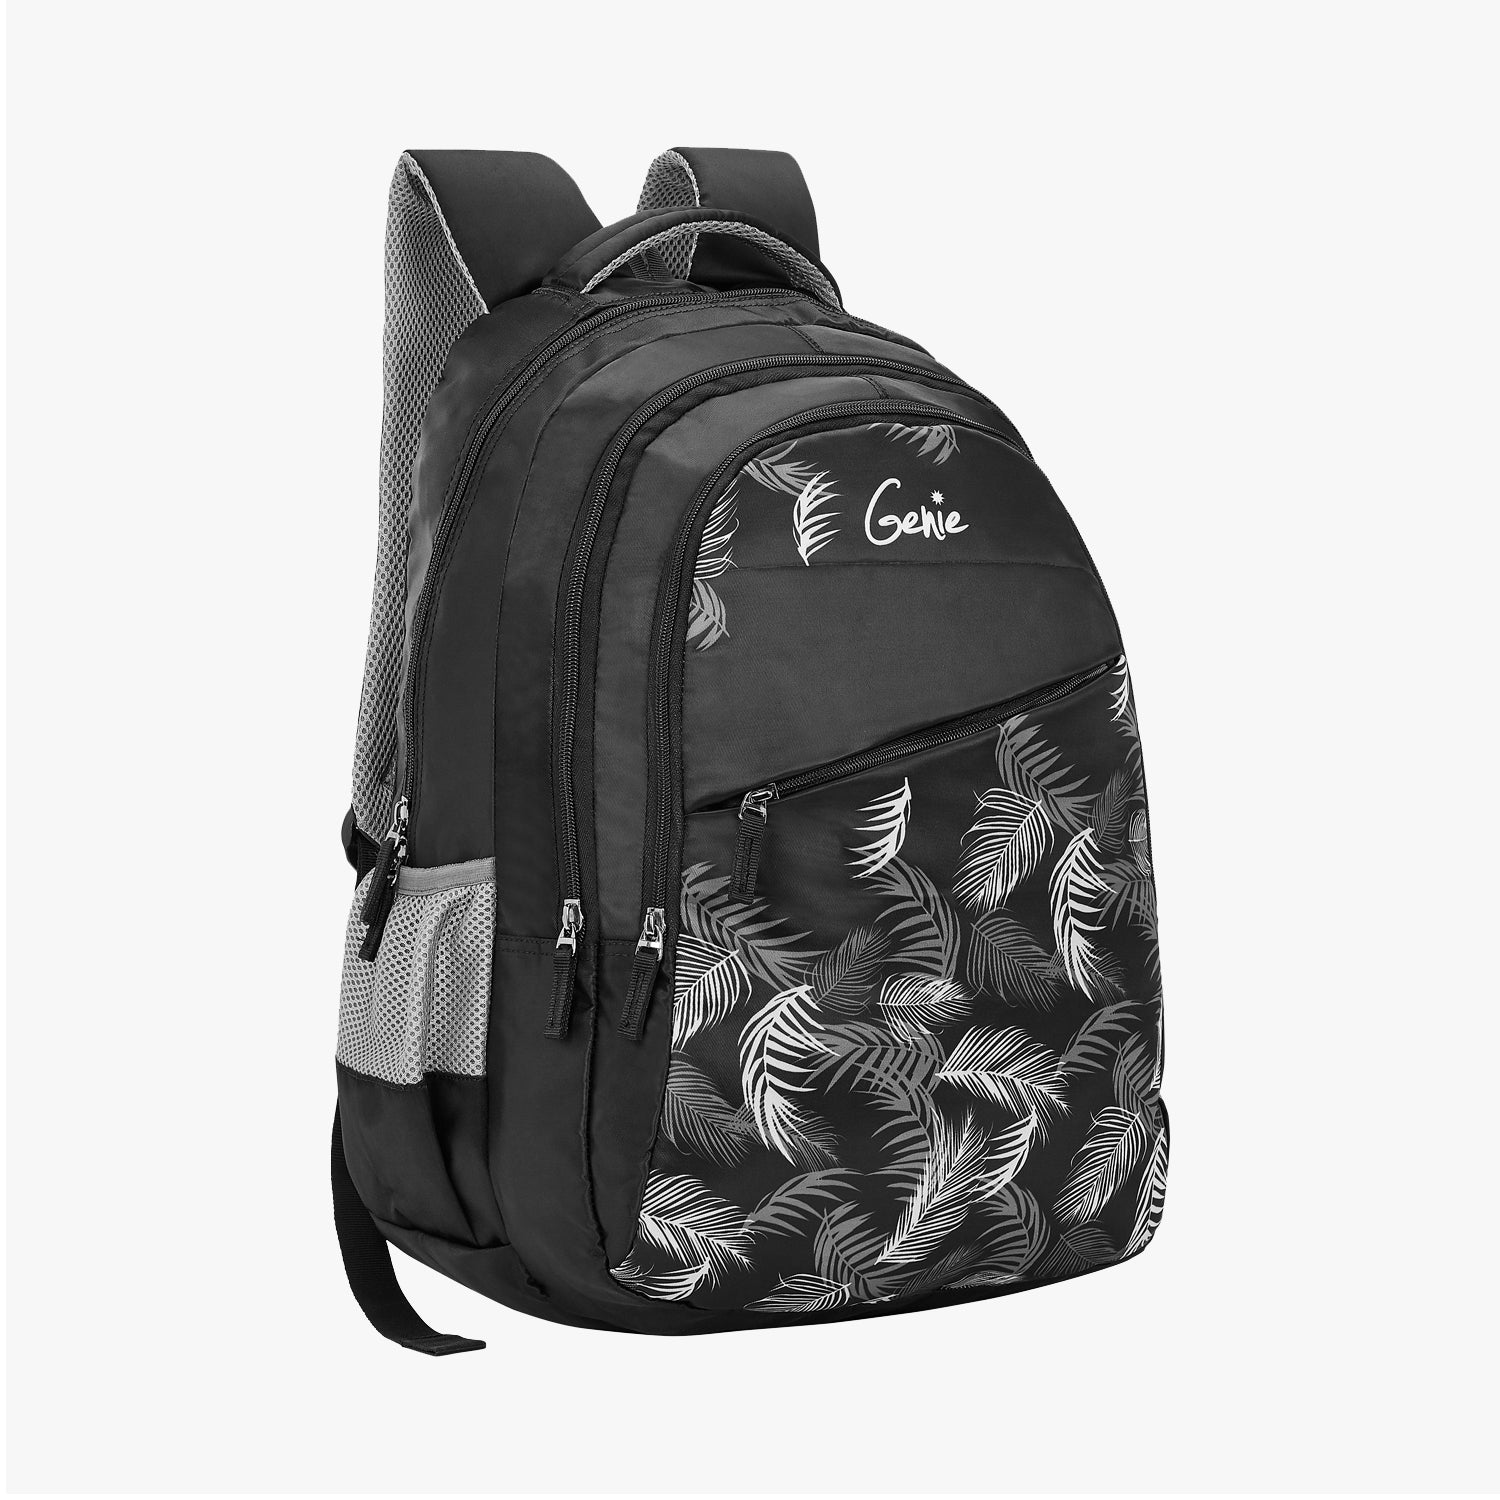 Genie Lush 36L Black School Backpack With Easy Access Pockets